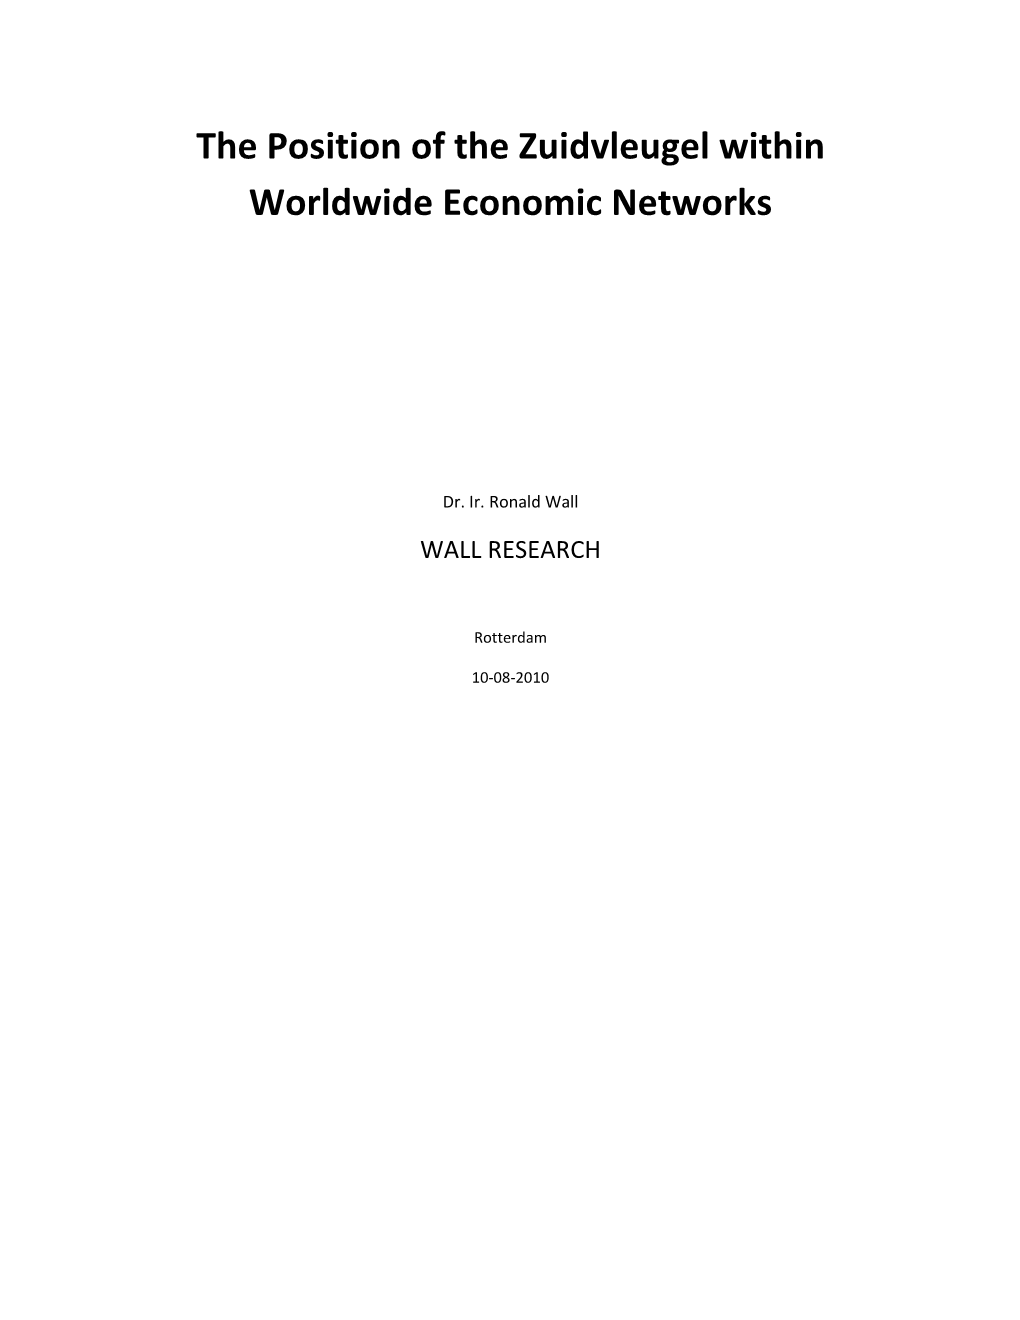 The Position of the Zuidvleugel Within Worldwide Economic Networks